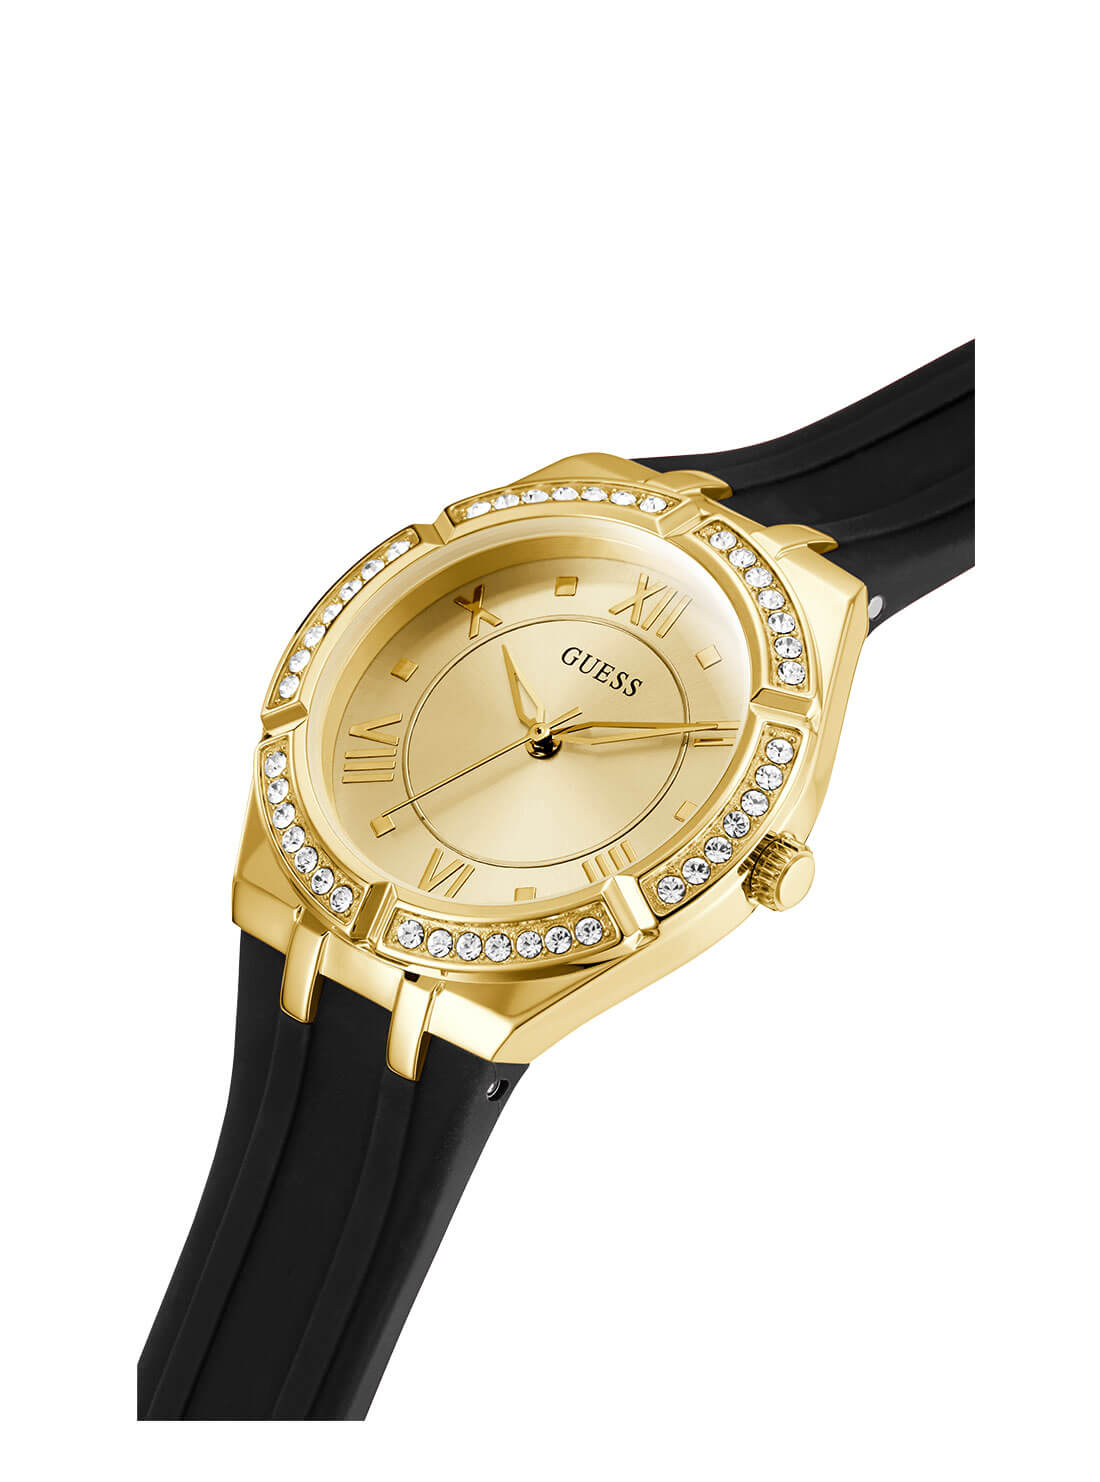 GUESS Women's Black and Gold Cosmo Watch GW0034L1 Angle View